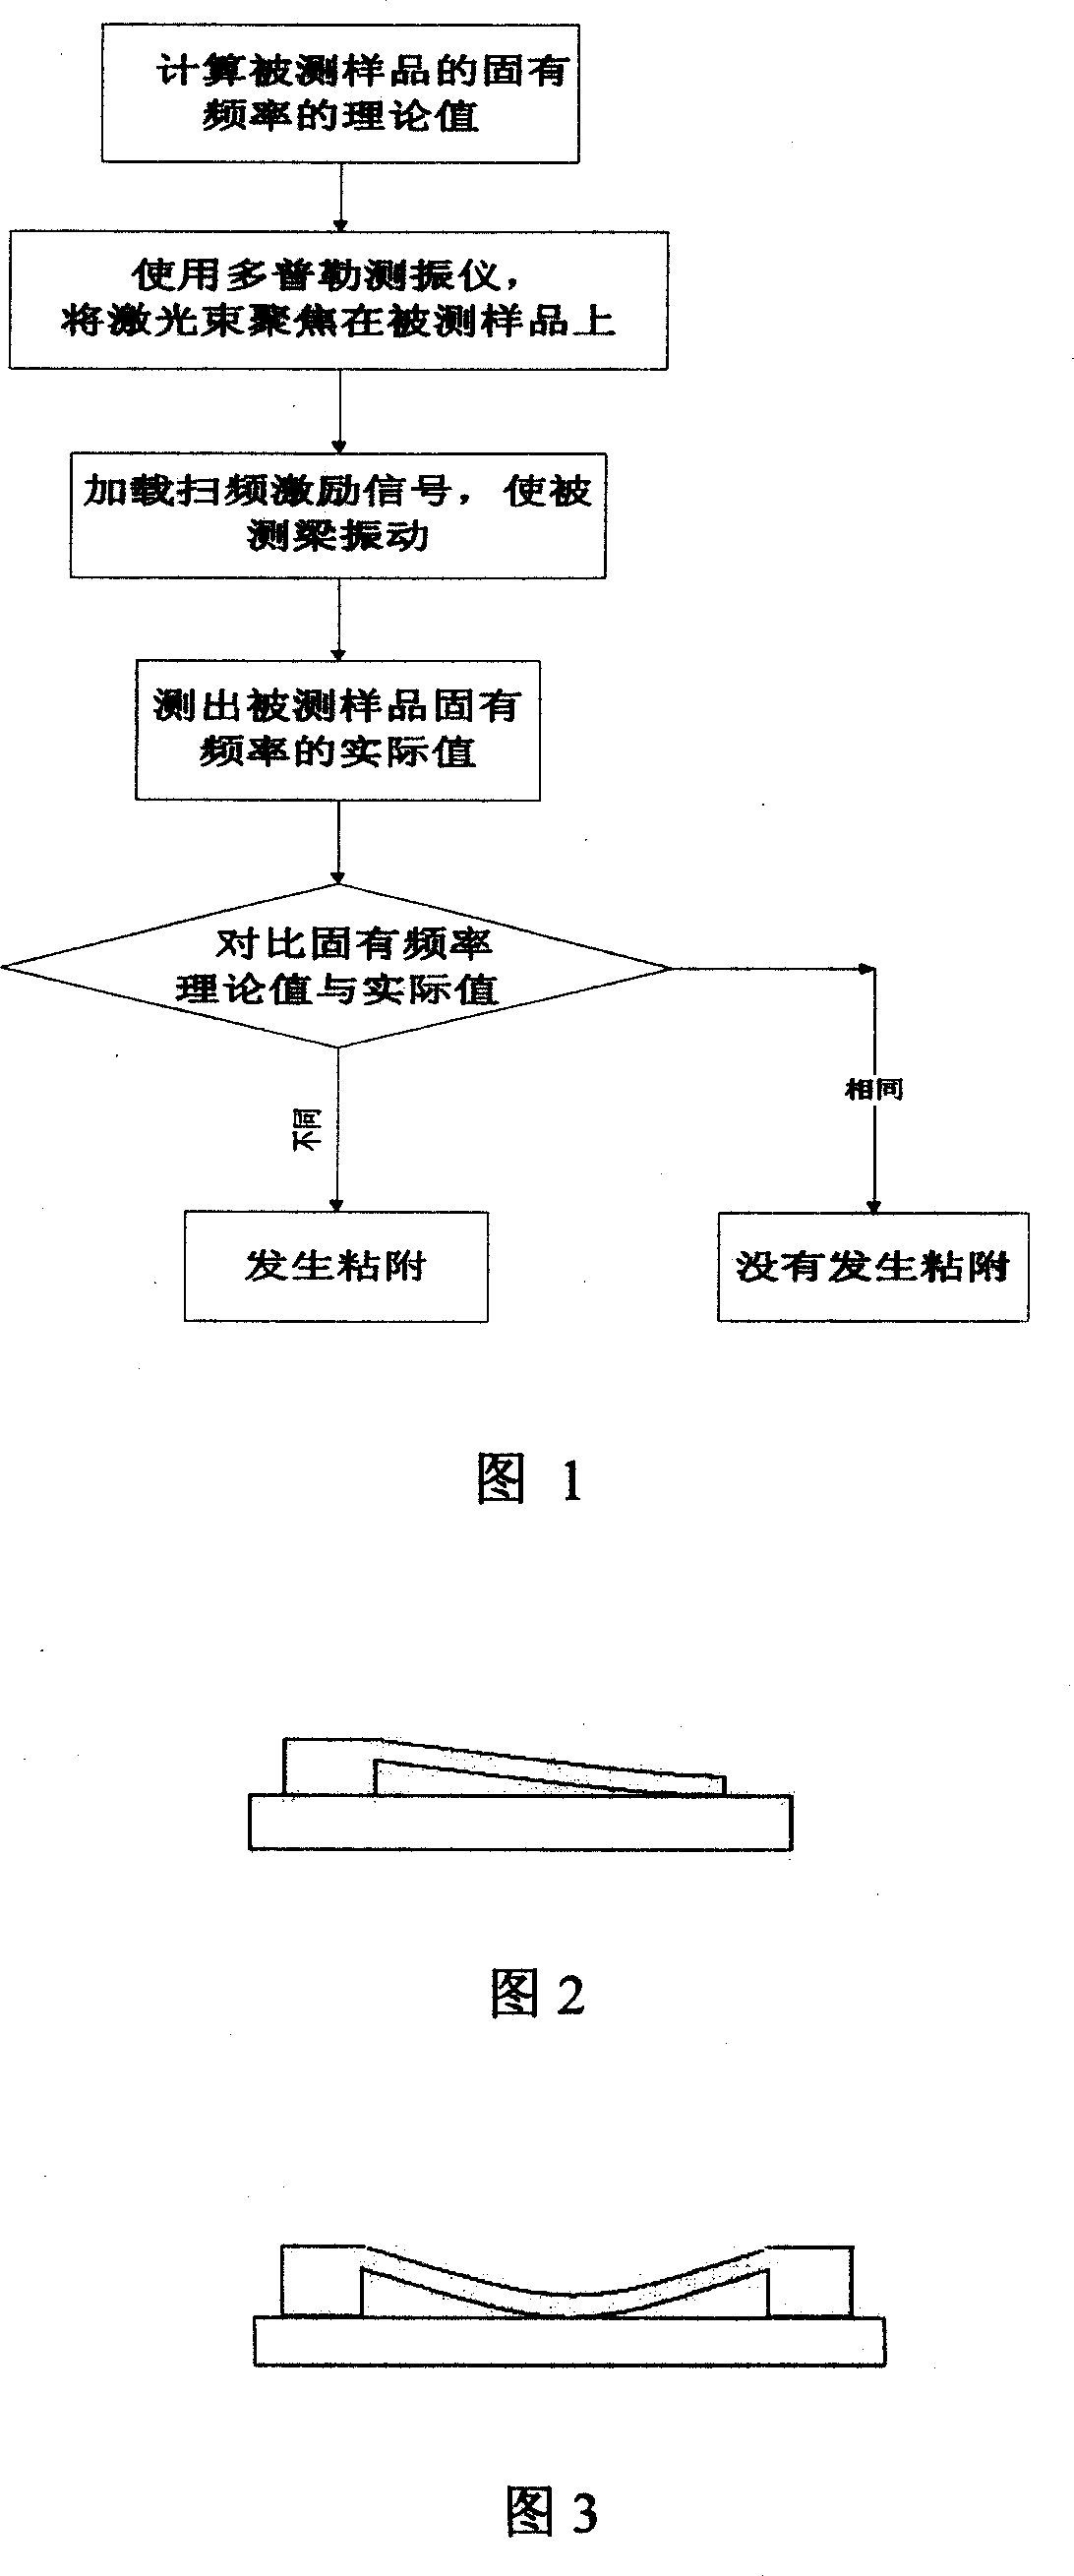 Detecting method for micro cantilever beam adhesion characteristics